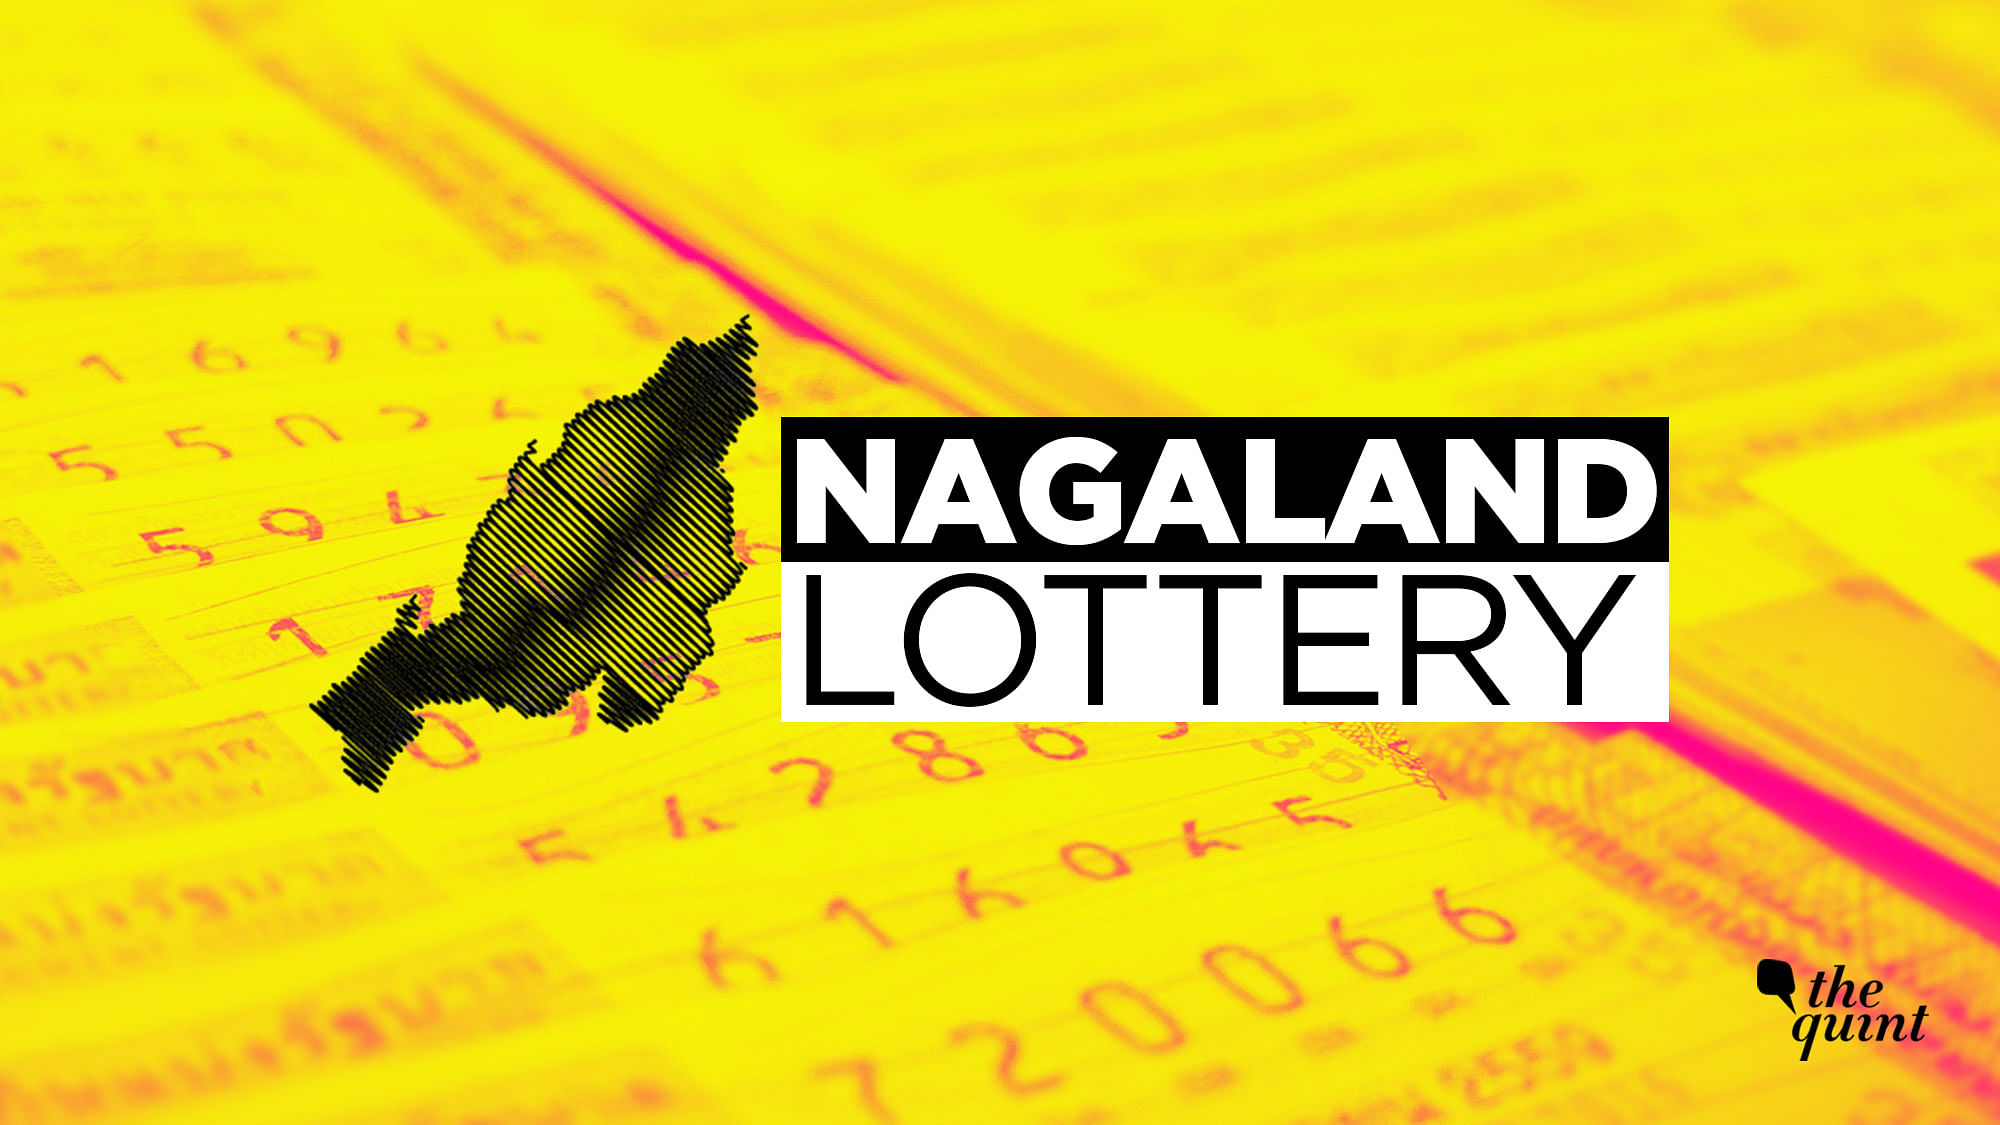 Nagaland State Lottery Results of Dear Faithful Morning lottery on their official website